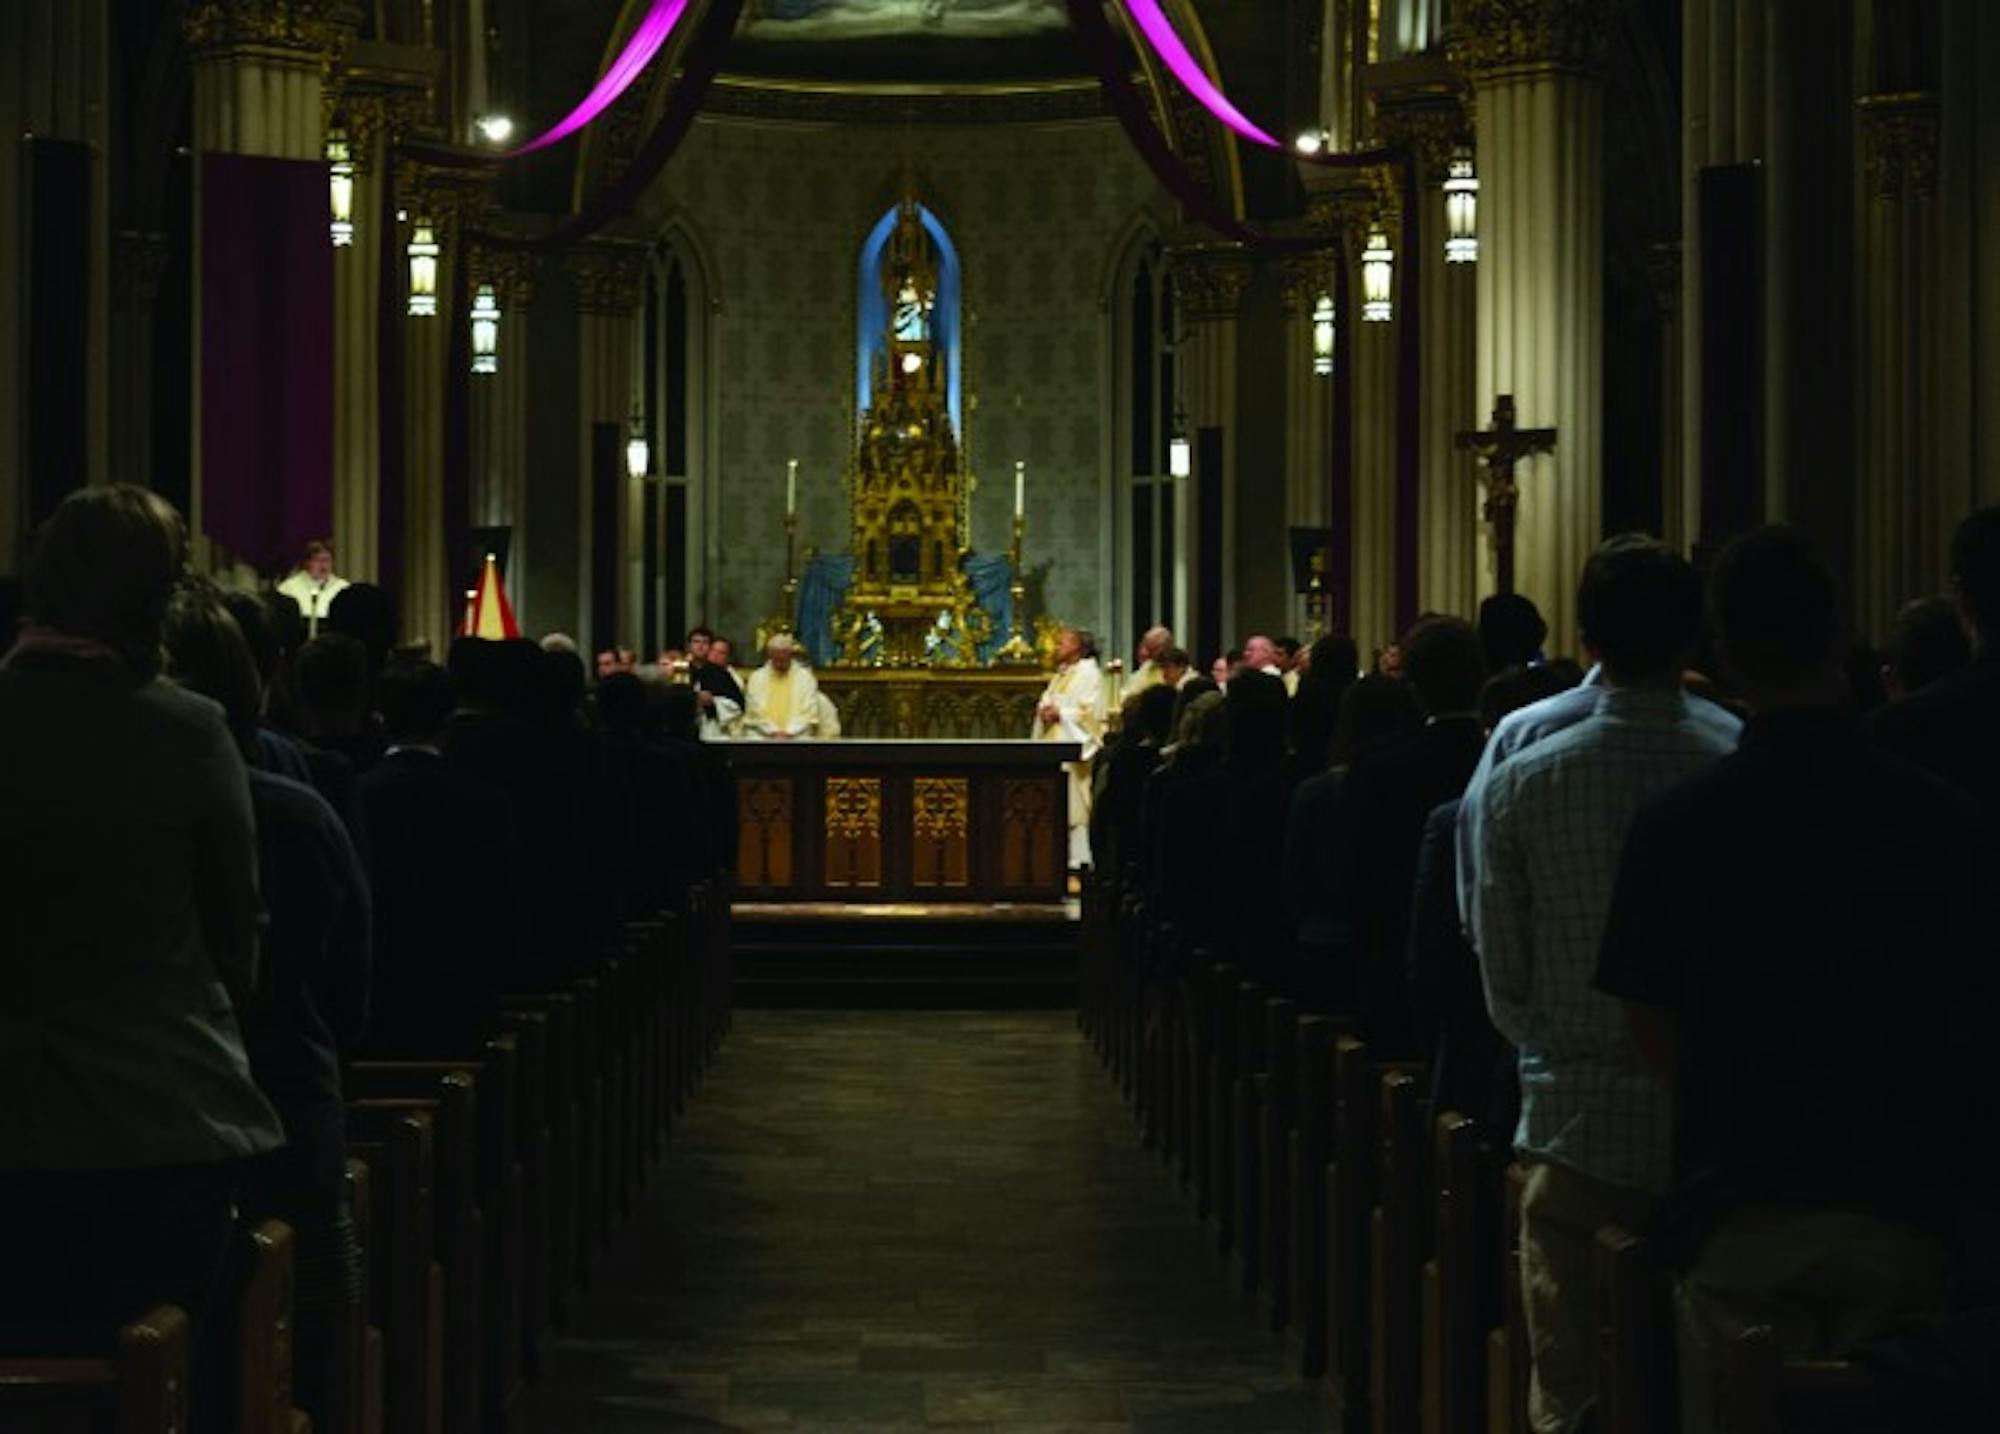 Students and other members of the Notre Dame community attended Mass at the Basilica of the Sacred Heart on Wednesday night in memory of junior Theresa Sagartz, who died last week.